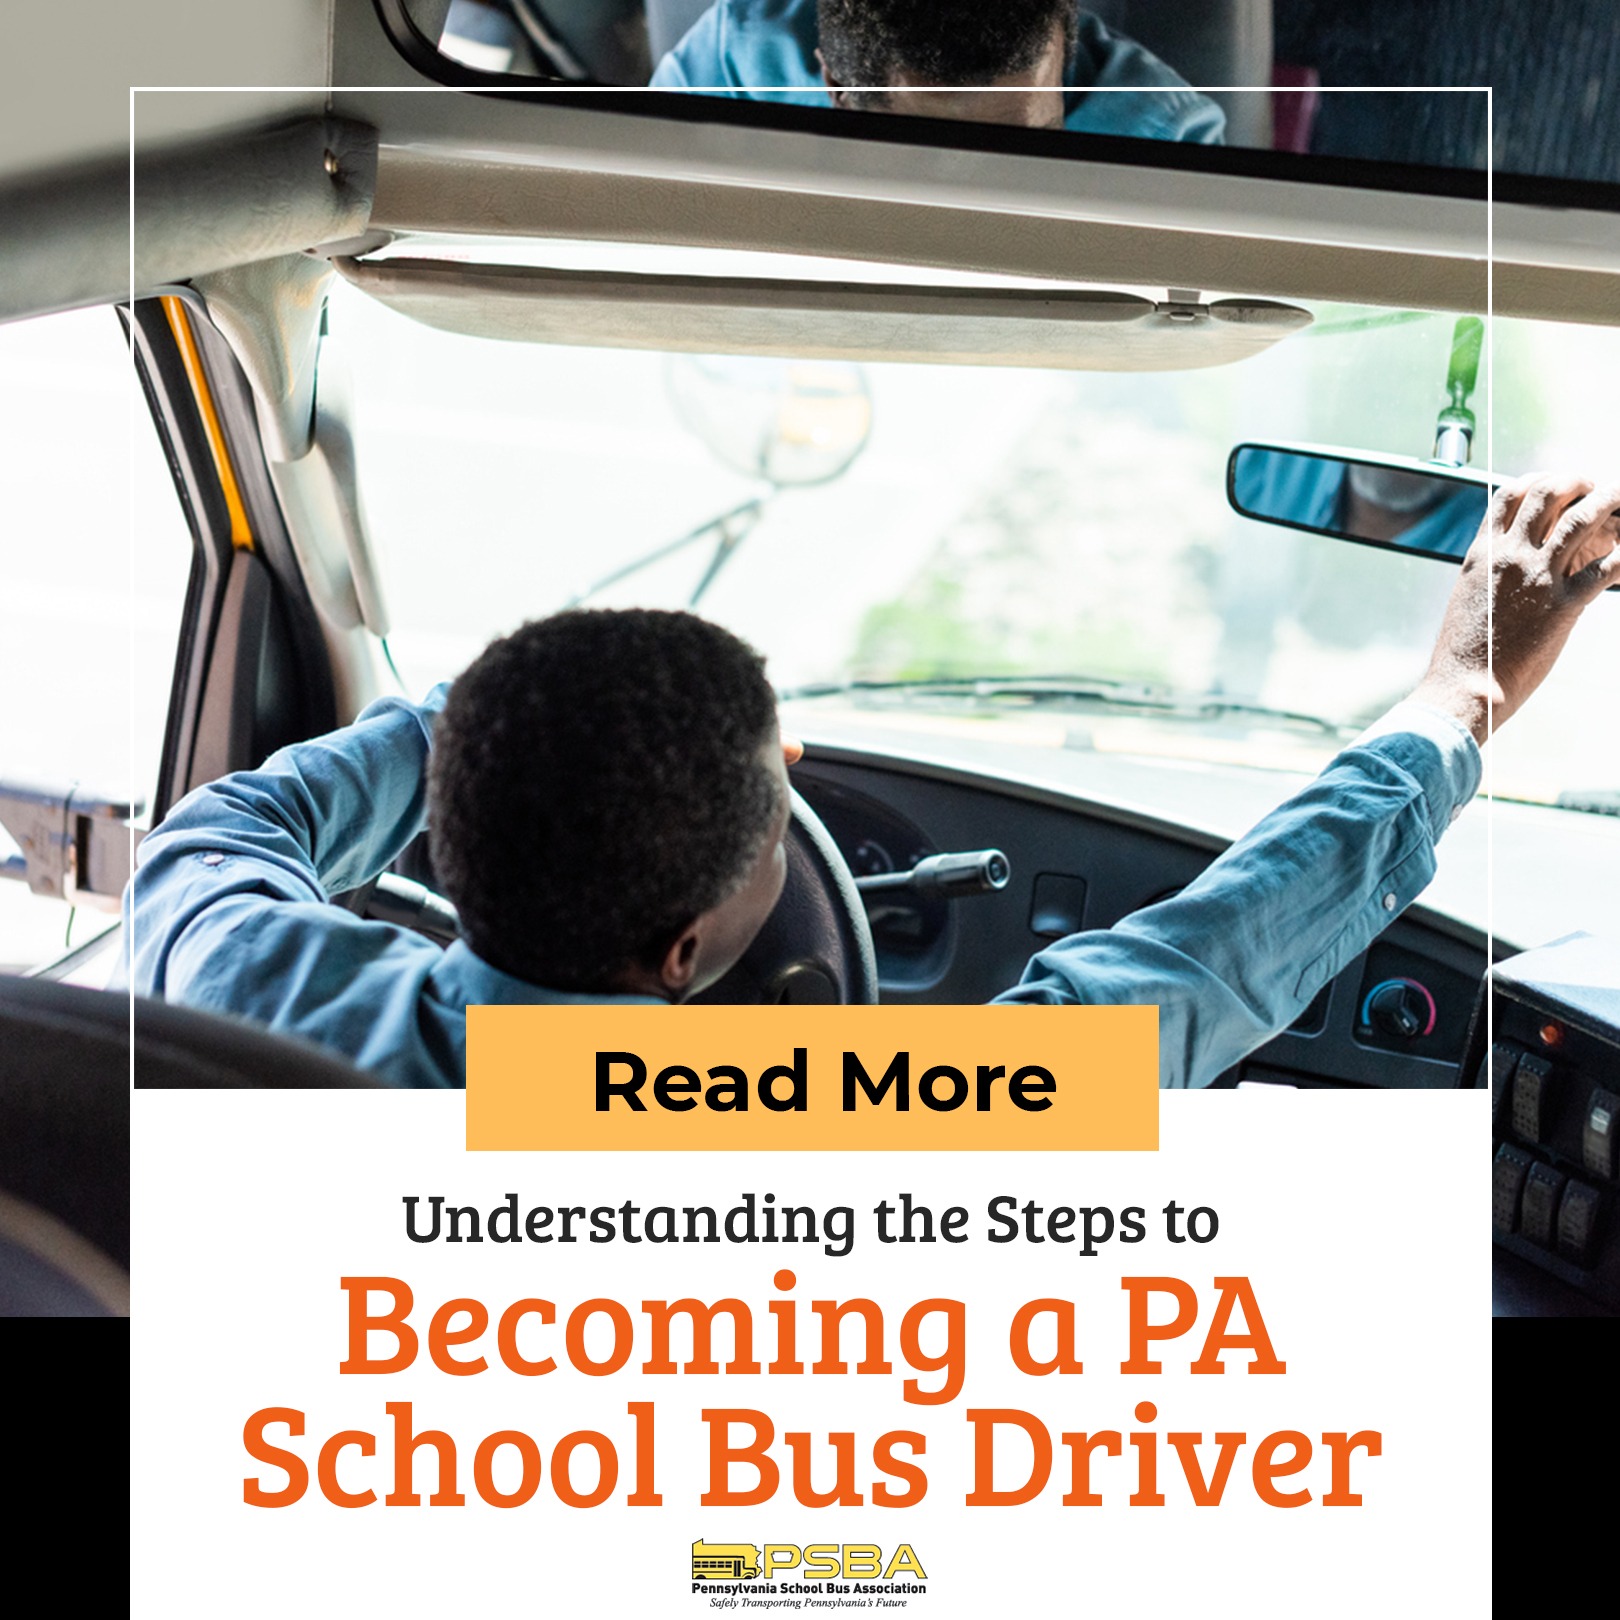 Understanding the Steps to Becoming a PA School Bus Driver